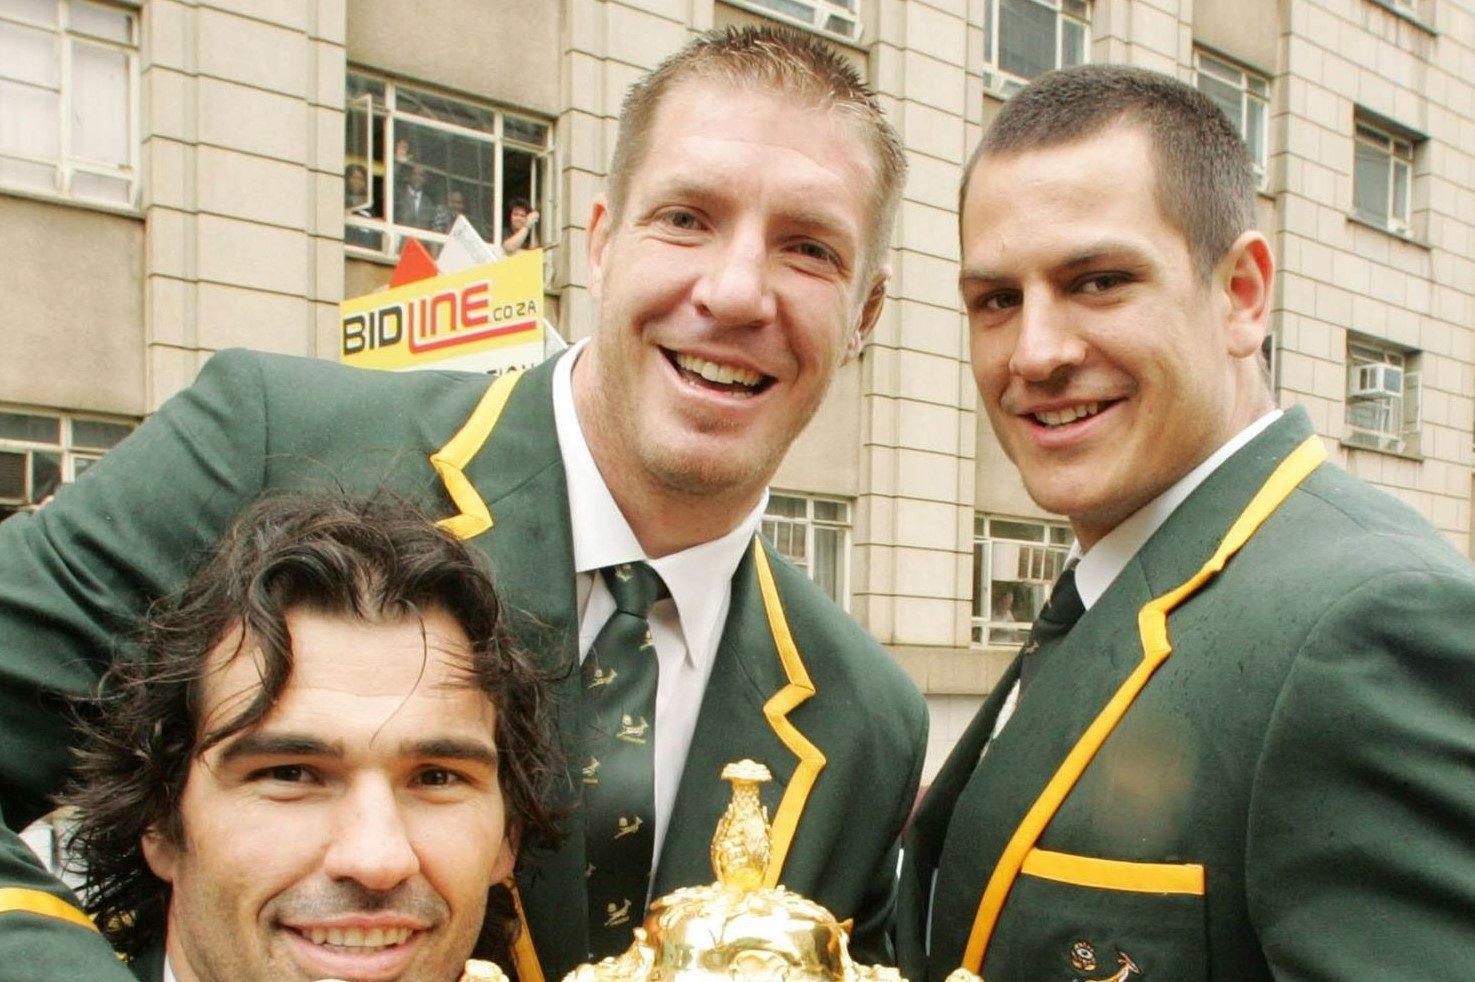 SOUTH AFRICA - OCTOBER 26: Victor Matfield, Bakkies Botha and Pierre Spies of South Africa hold the Webb-Ellis Cup during the Springboks Rugby World Cup victory parade between Pretoria and Johannesburg, on October 26, 2007 in South Africa. (Photo by Duif du Toit/Gallo Images/Getty Images)